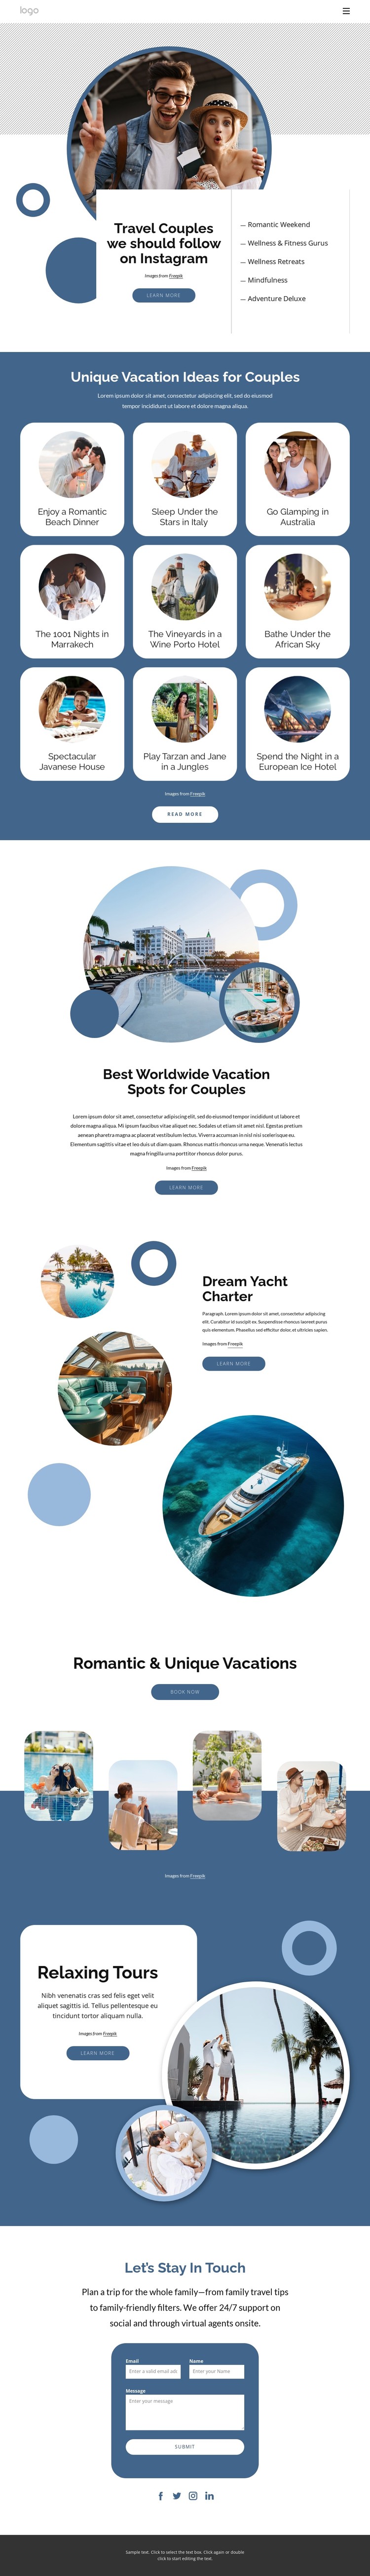 Imagine travelling to some of the most amazing places CSS Template